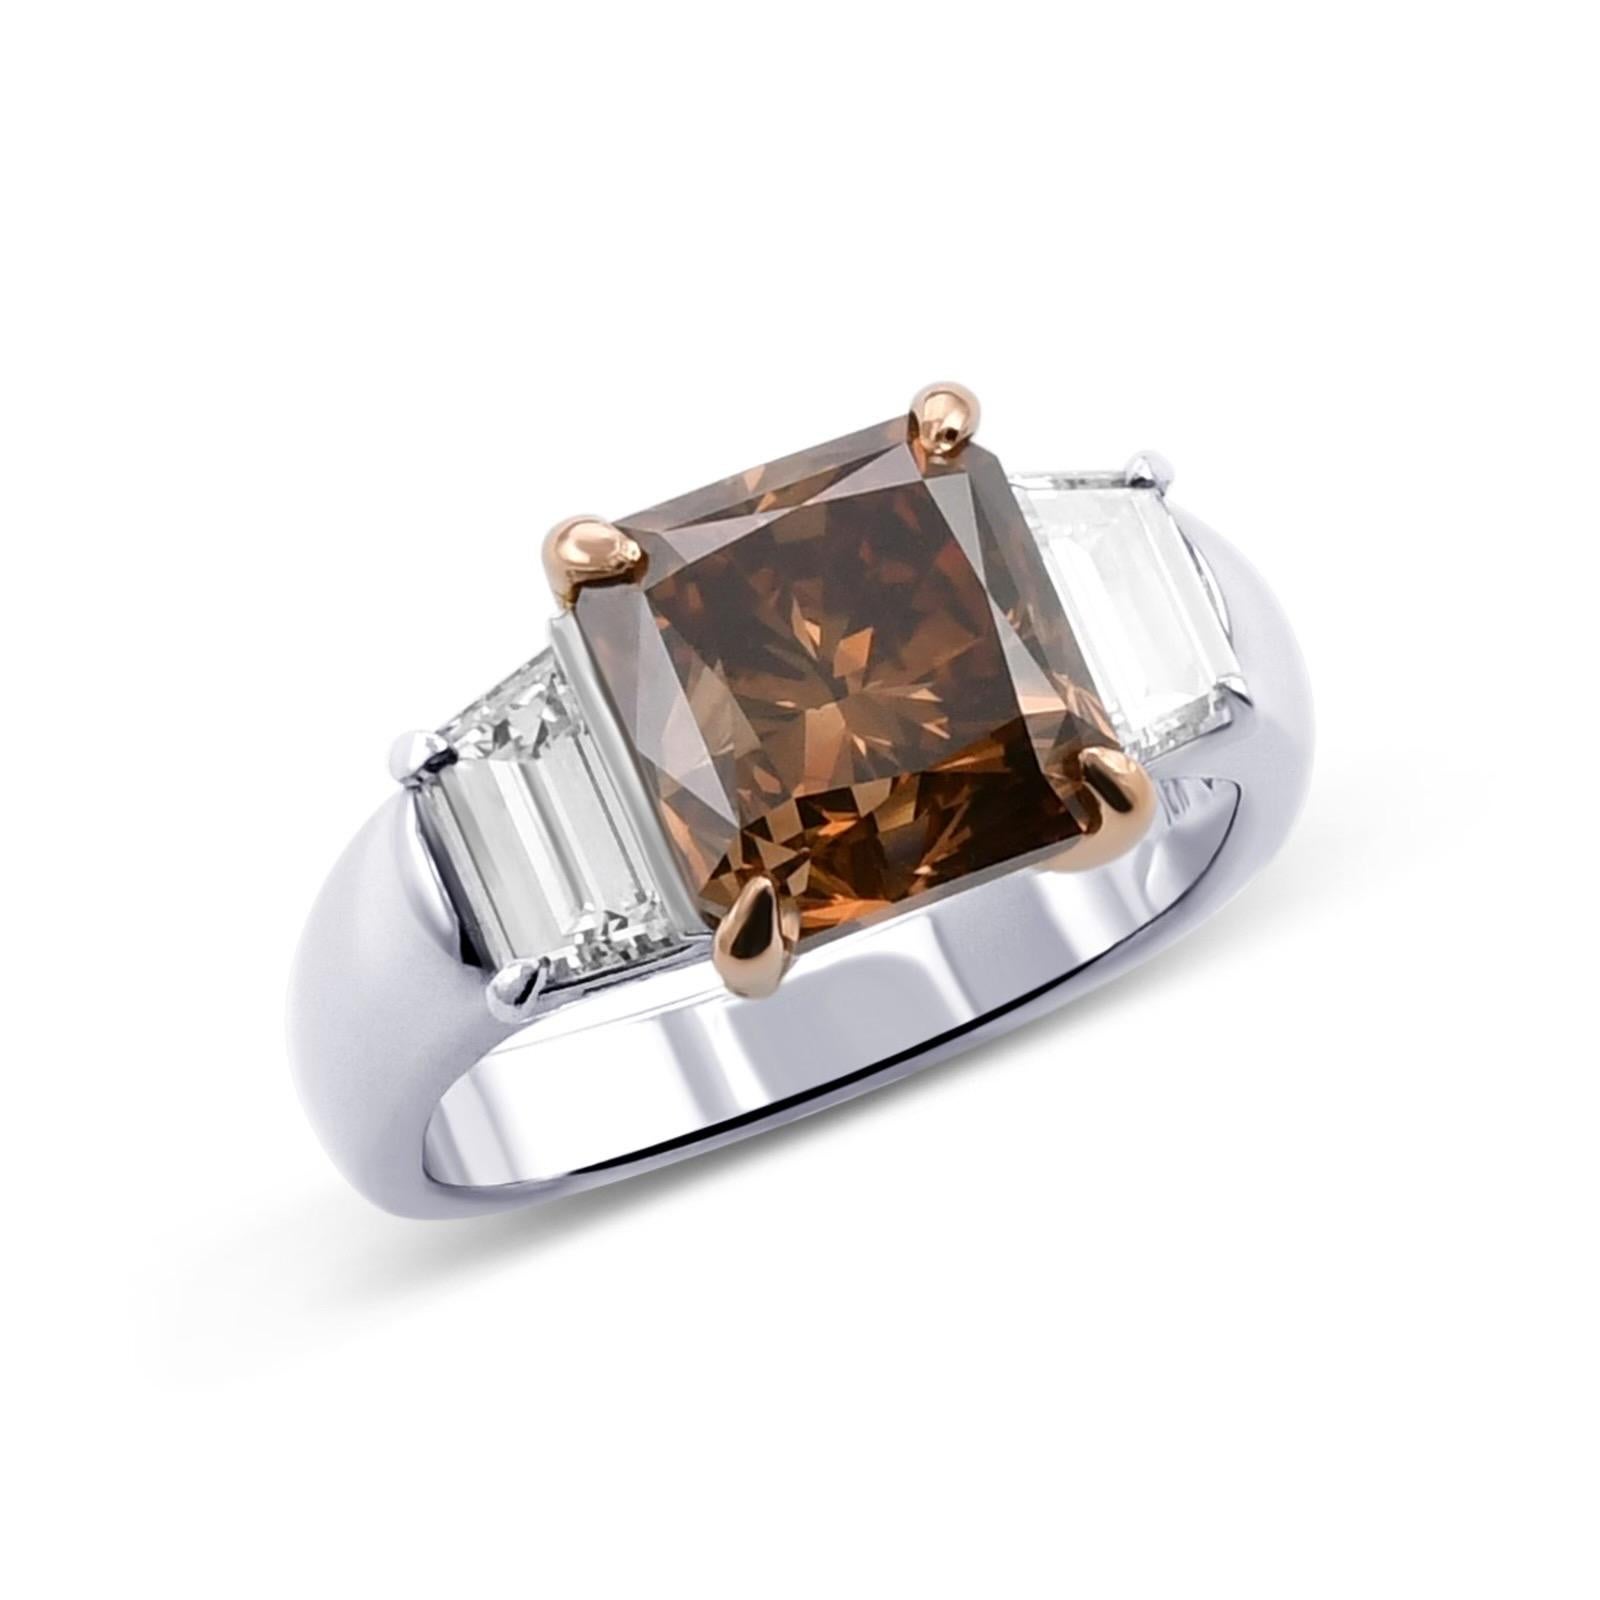 Handmade platinum & 18k rose gold ring with 2 trapezoids on the side F & color VS clarity TW. 0.65ct, center diamond is radiant cut of Natural Fancy Dark Orange Brown color & VS2 clarity 
GIA#2205876326

Viewings available in our NYC wholesale